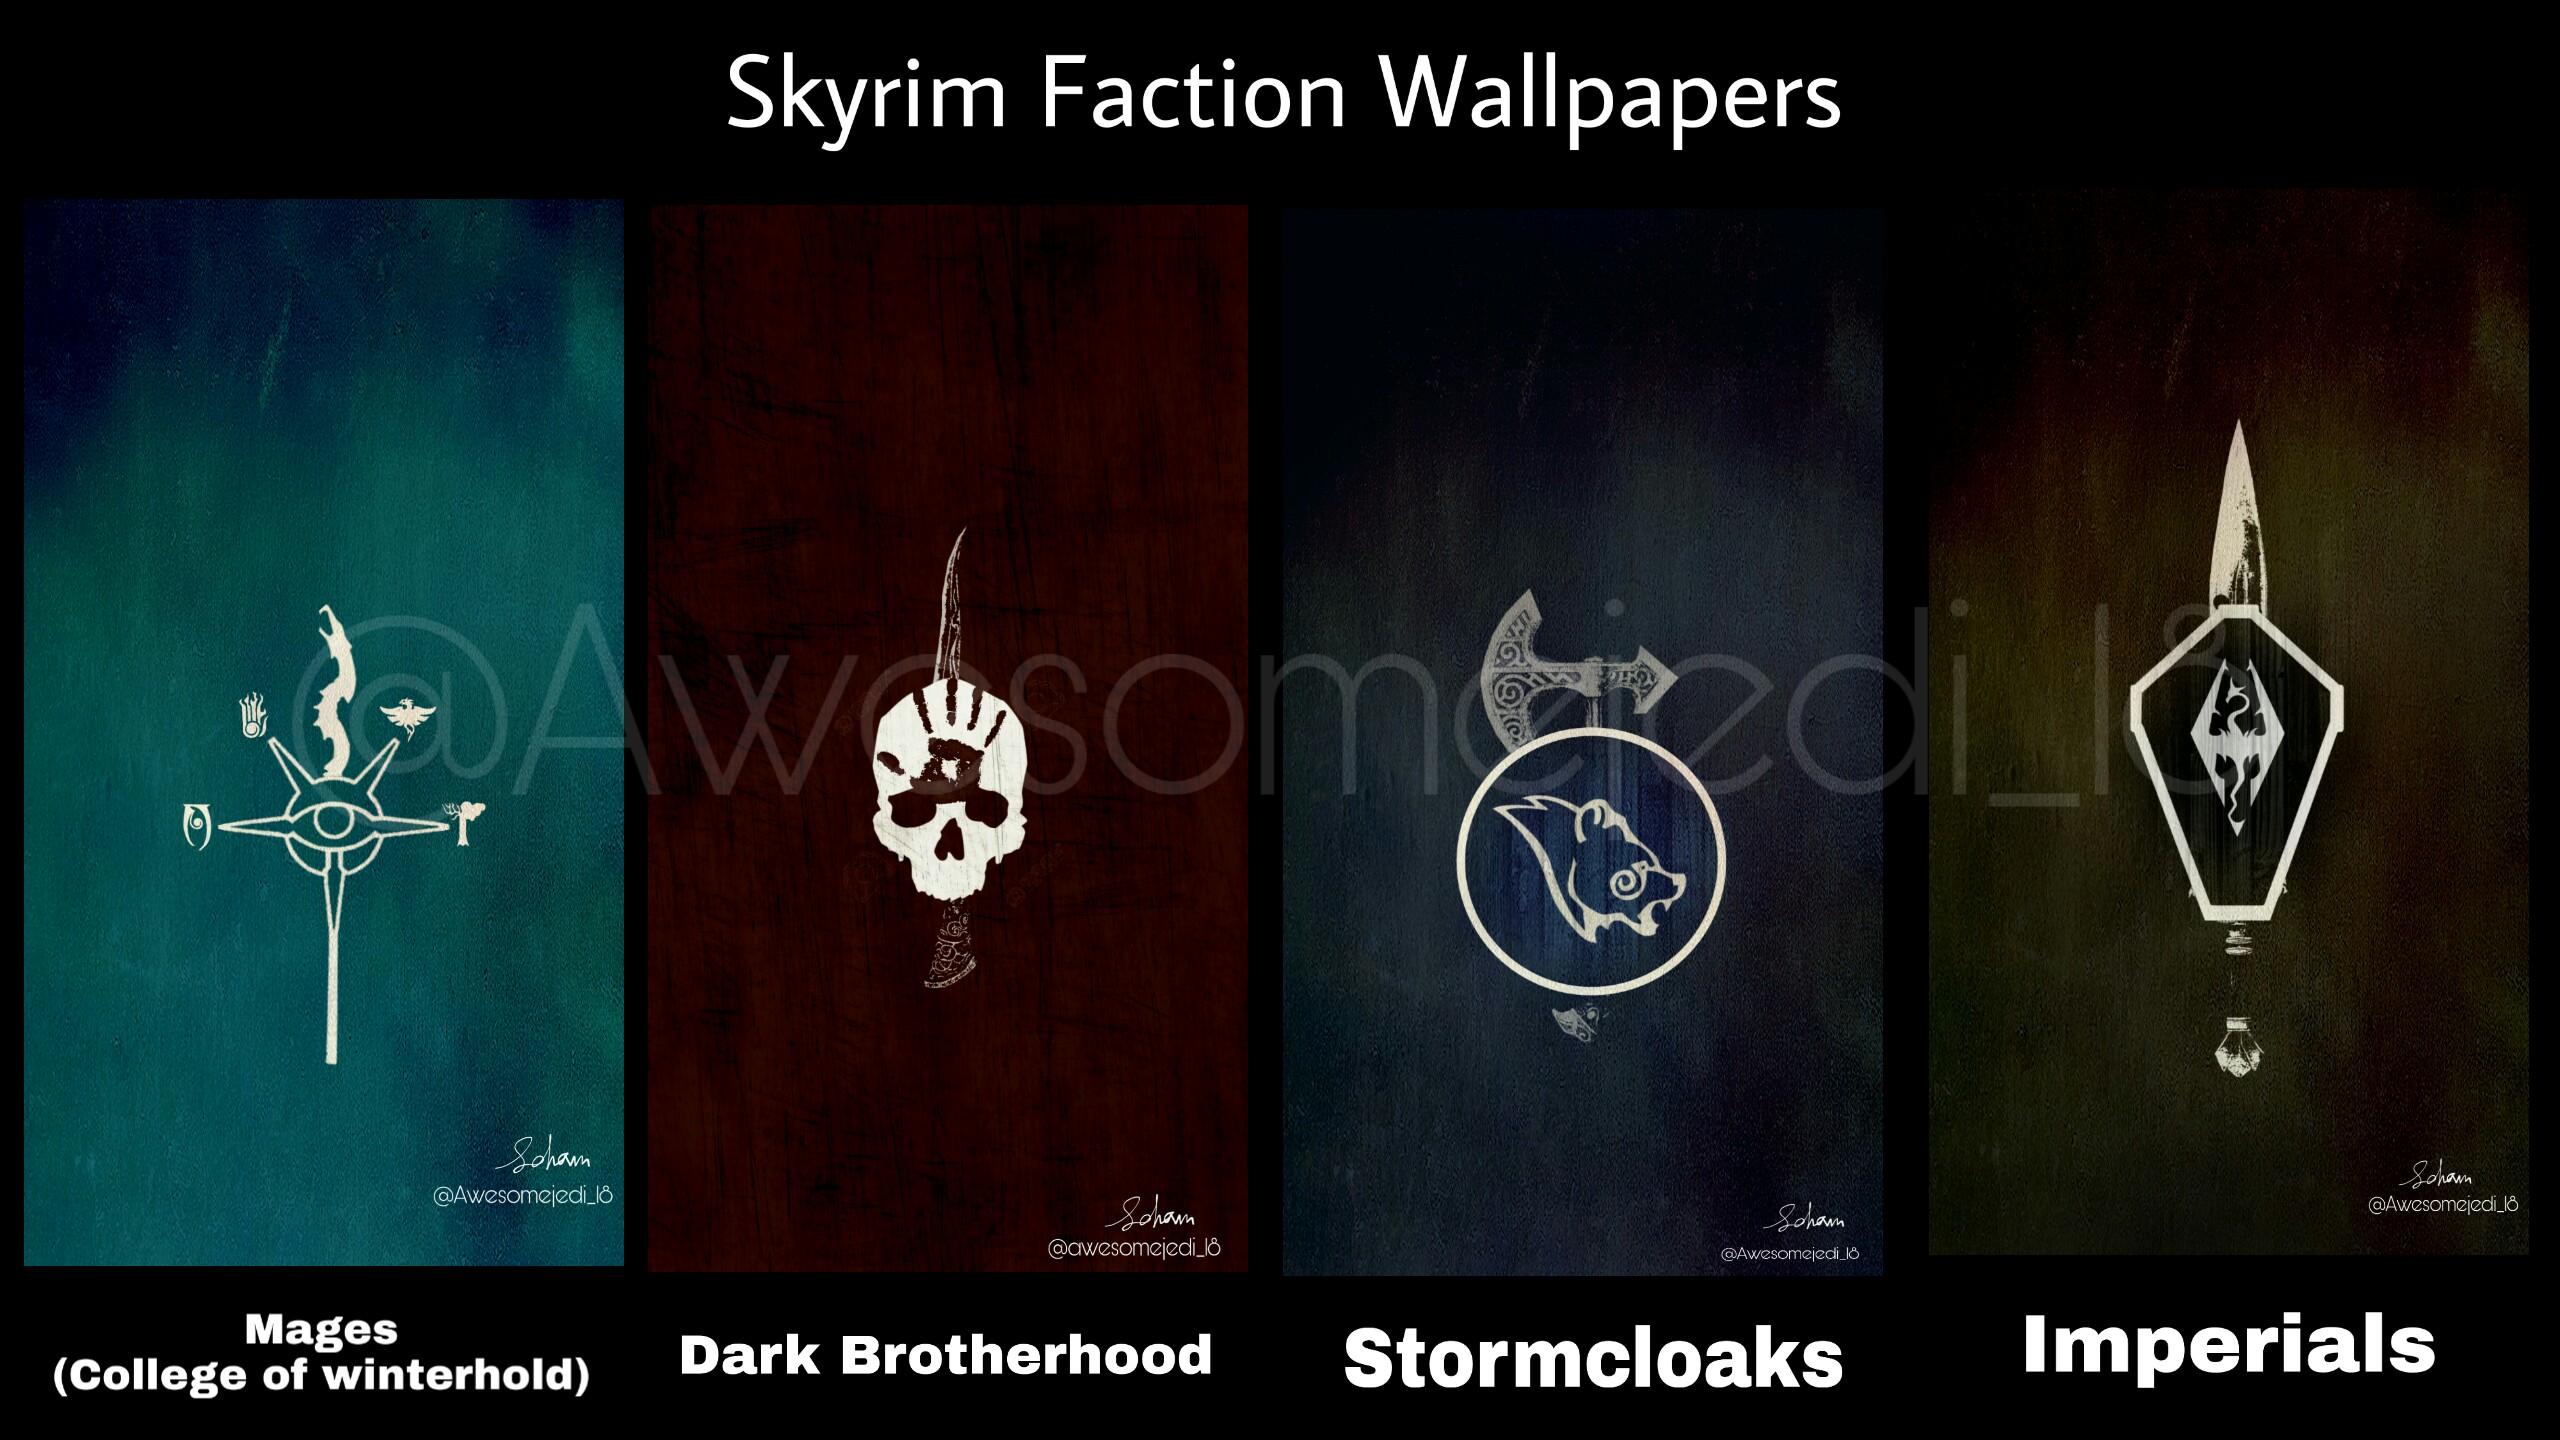 October Faction Wallpapers